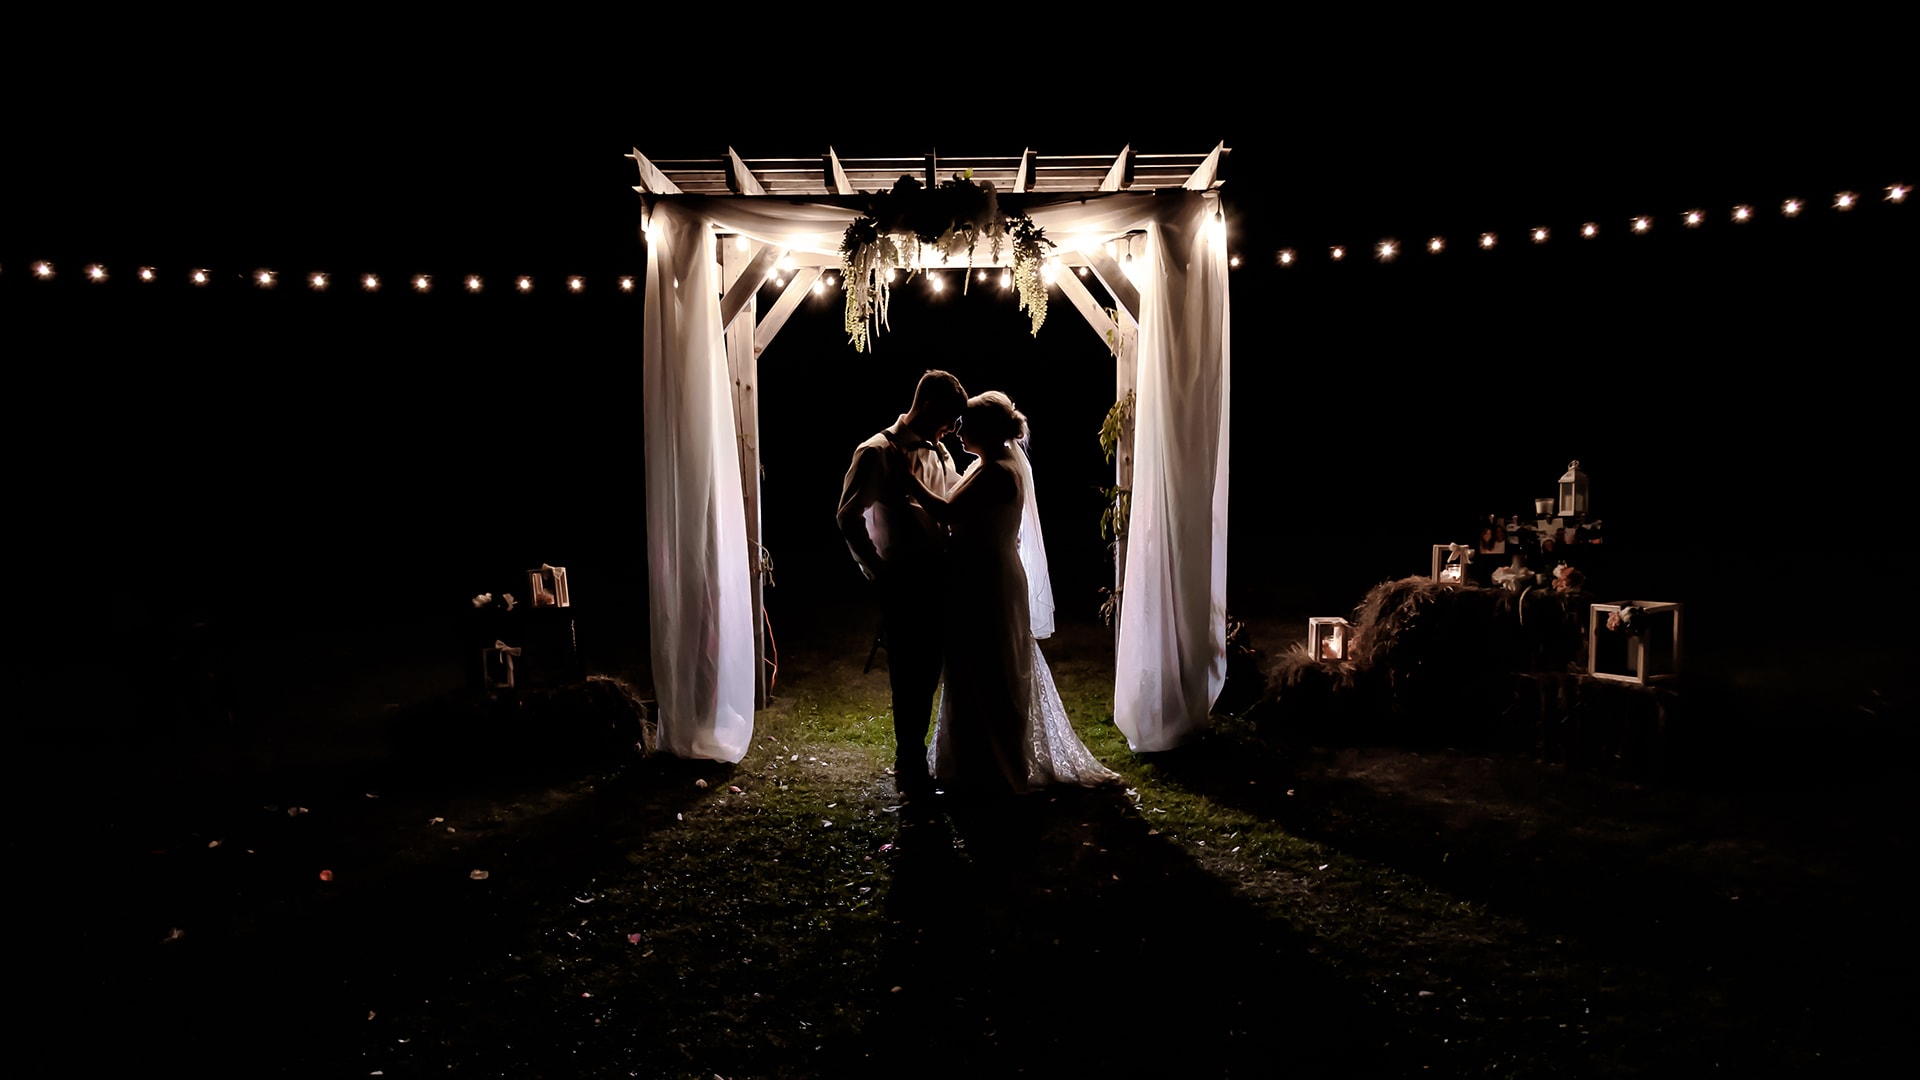 Bride and groom in silhouette, night wedding photos under a trellis at the barn at Sadie Belle Farm in Nova Scotia.